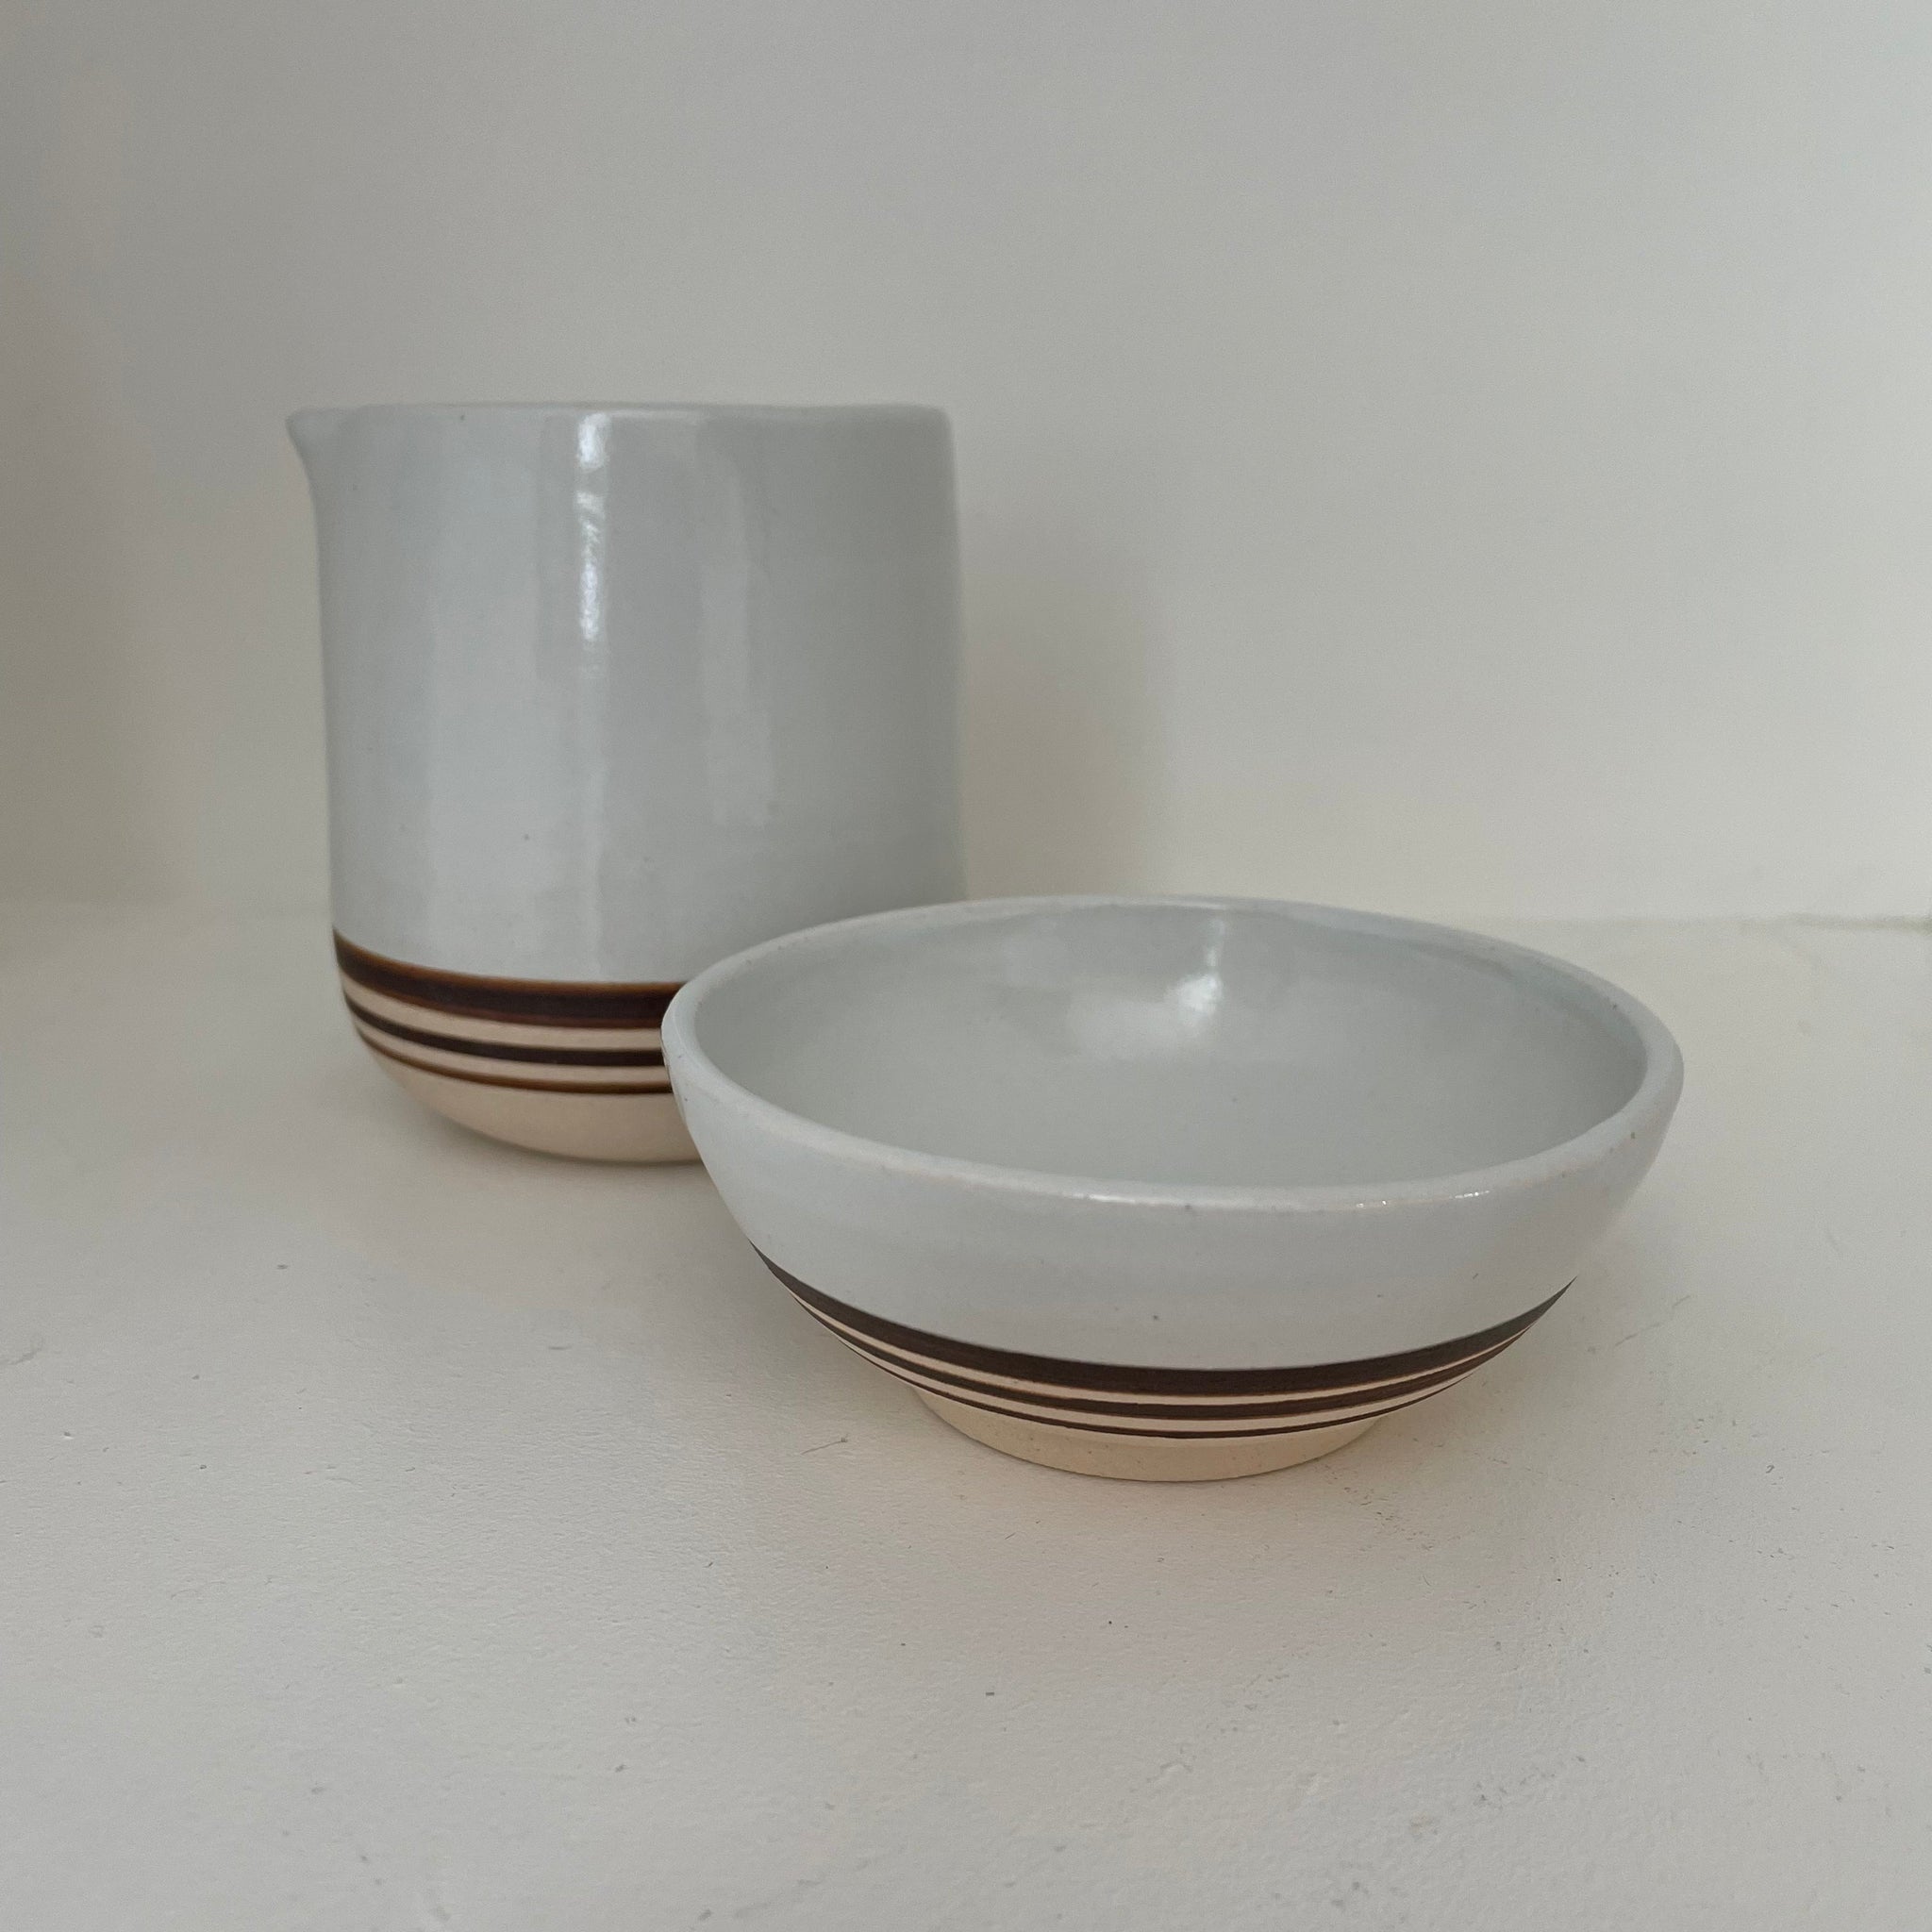 Charlotte Grinling Ceramics pale Blue with Chocolate Stripe collection